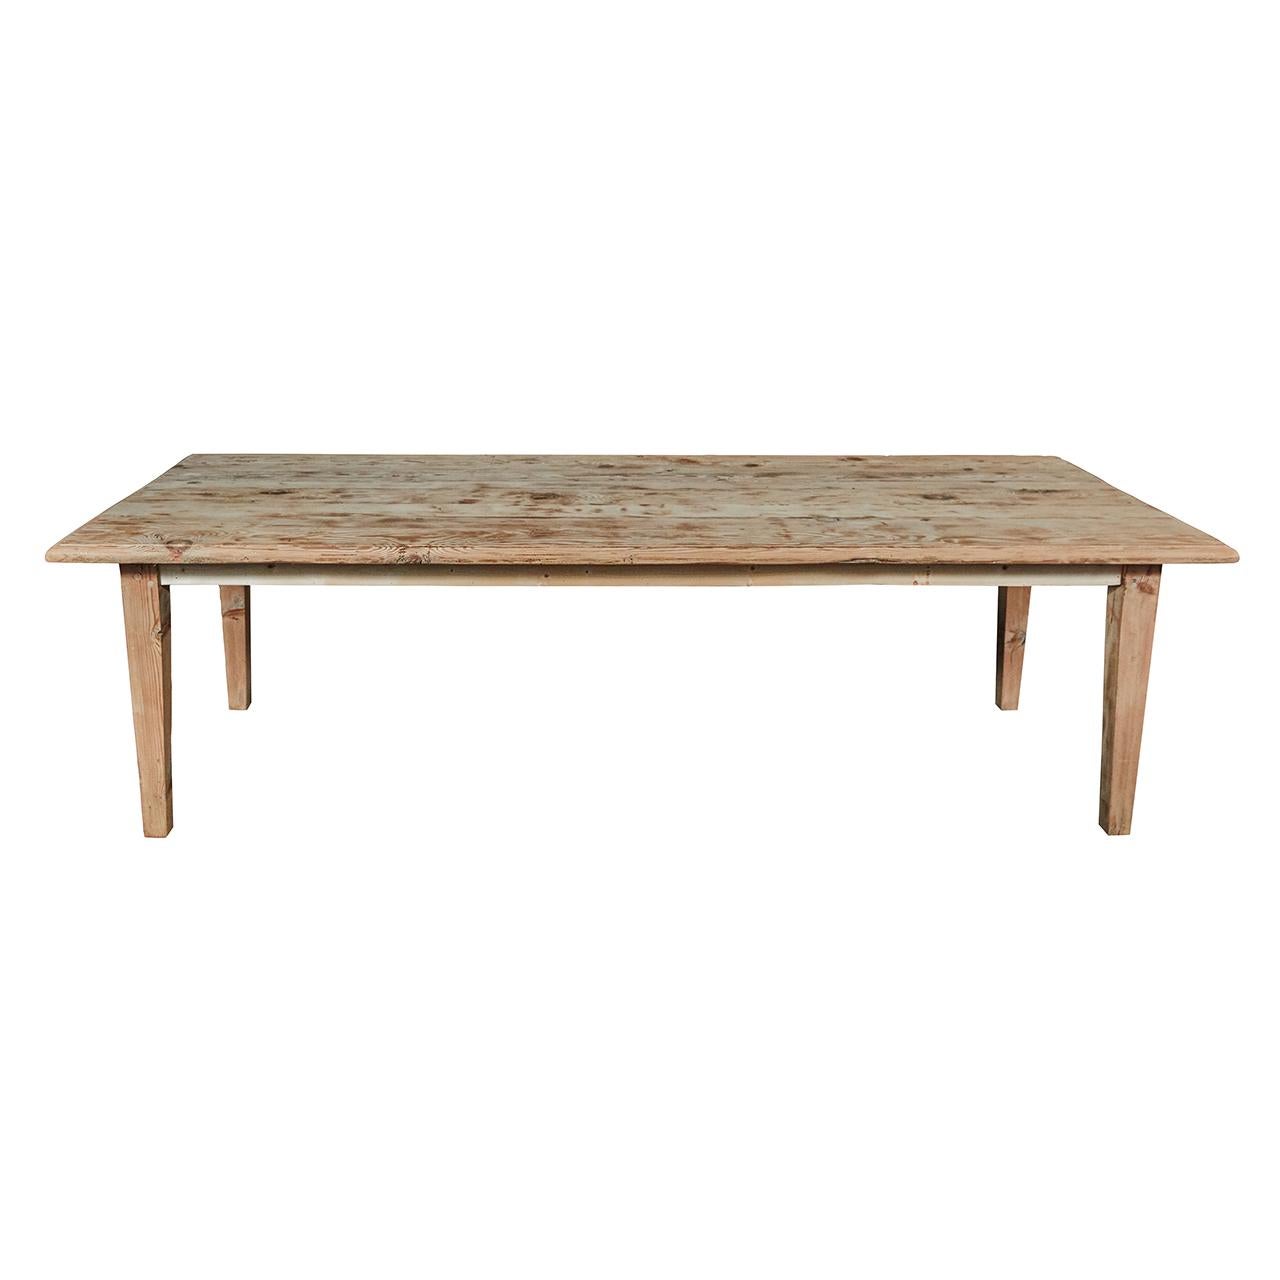 Large Pine Rustic Dining Table For Sale